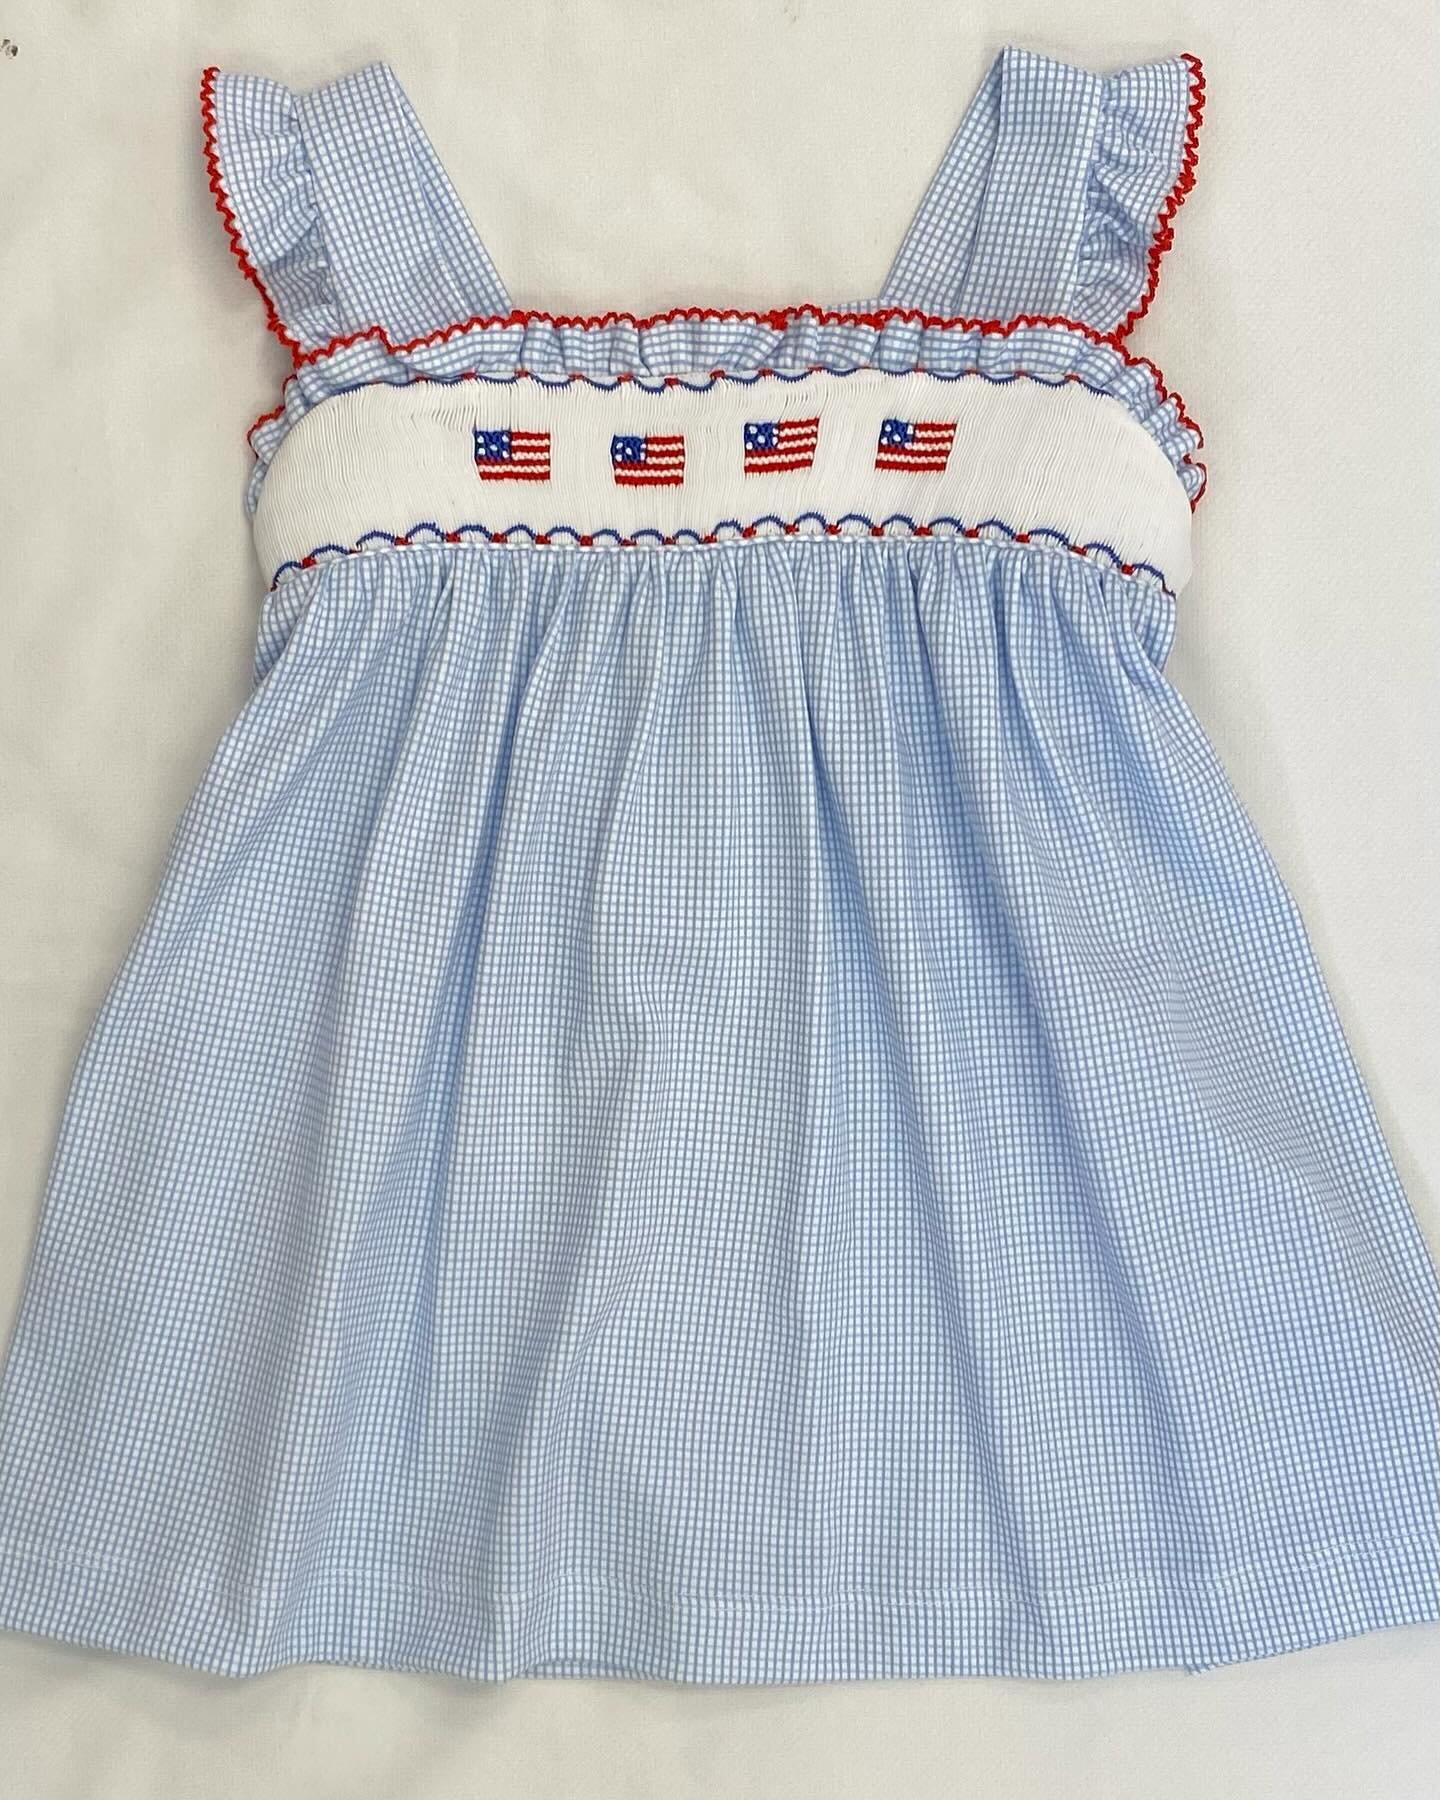 There&rsquo;s always room for flags in her wardrobe 🇺🇸🇺🇸
.
.
#childrensshop #childrensshopatl #smocking #flags #memorialday #july4th #toddlergirl #shoplocal